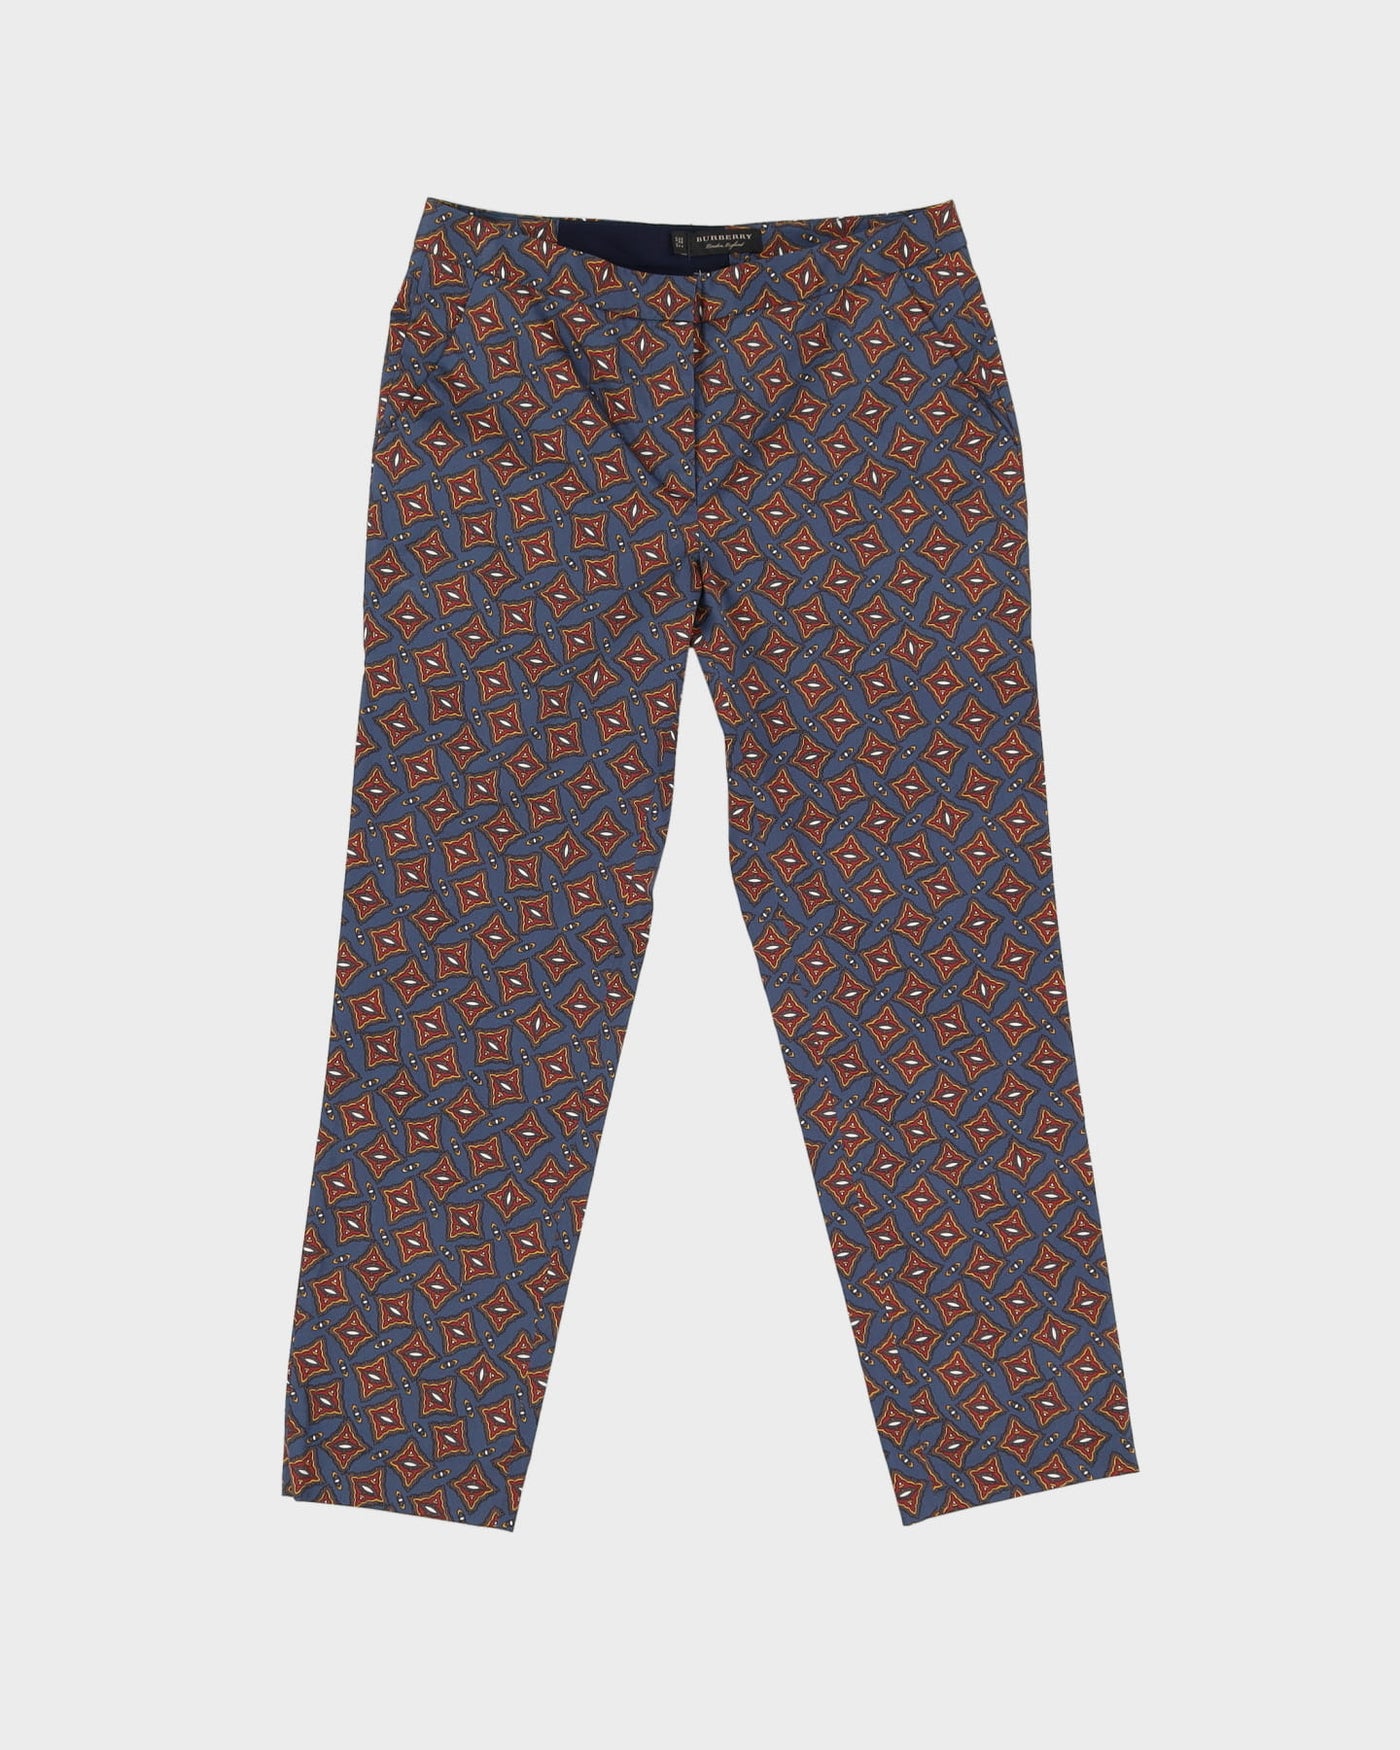 Burberry Blue Patterned Trousers - W28 L26